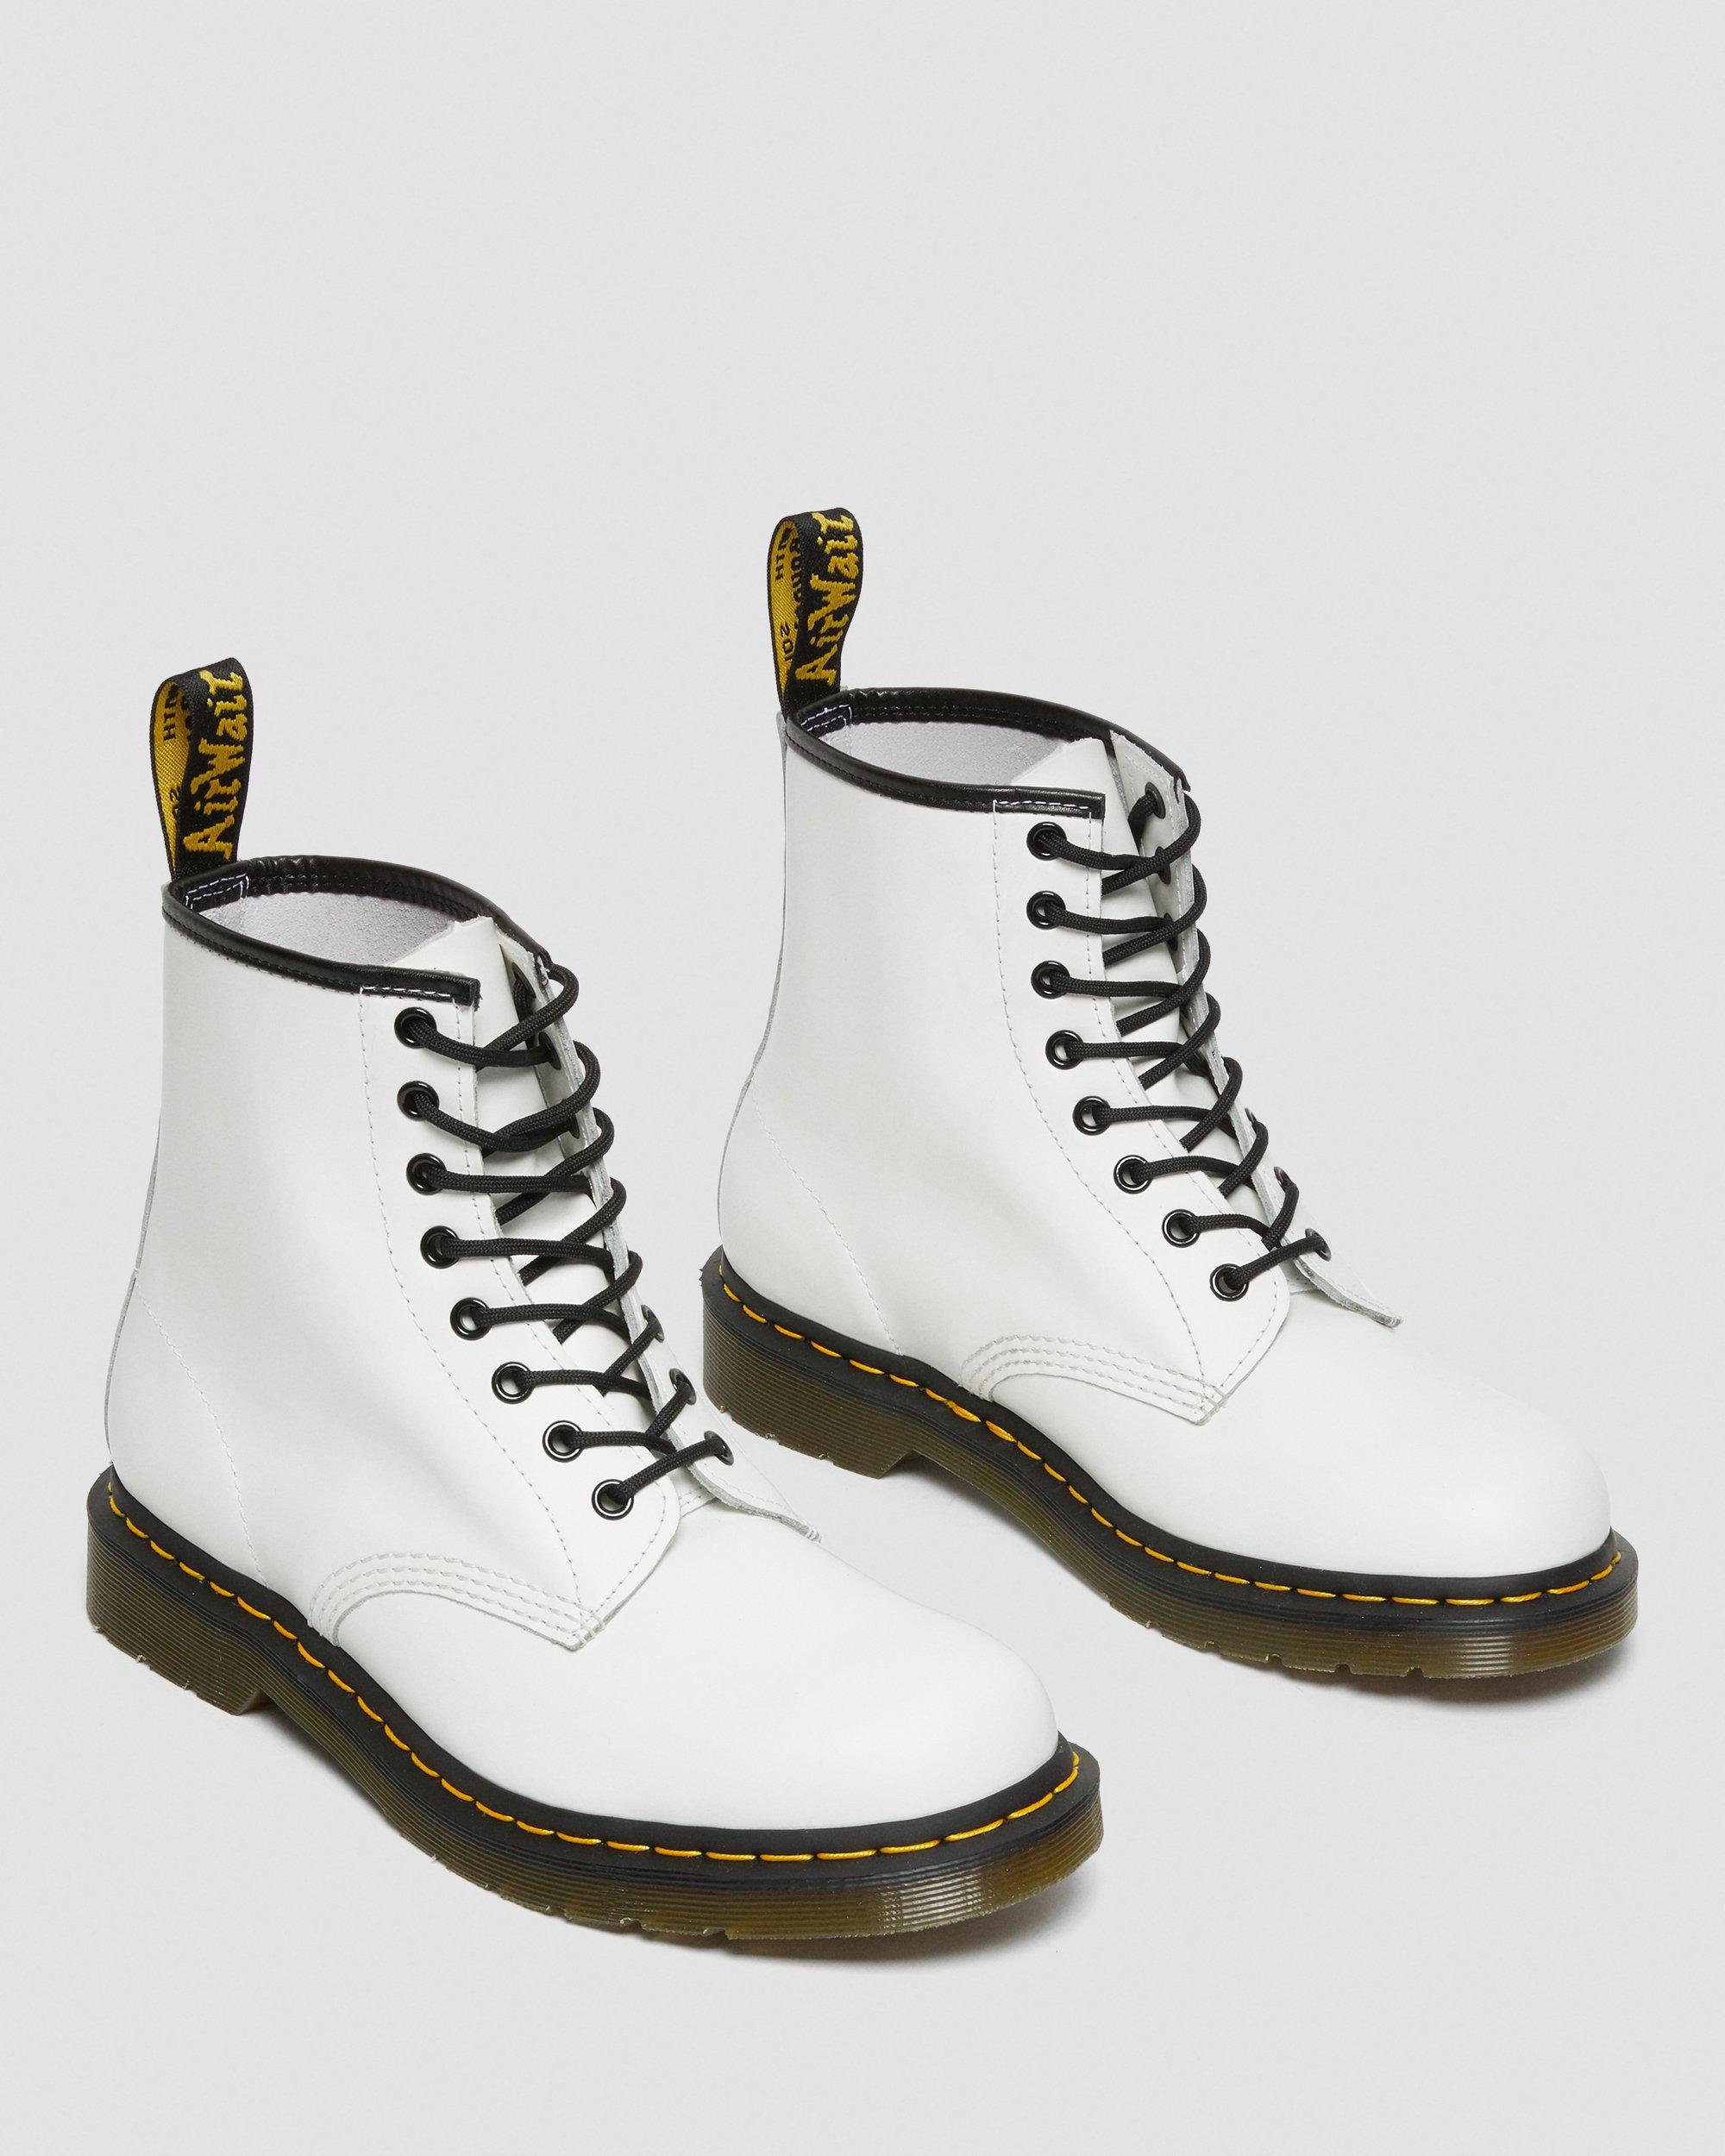 White Dr. Martens Shoes - How to Wear and Where to Buy